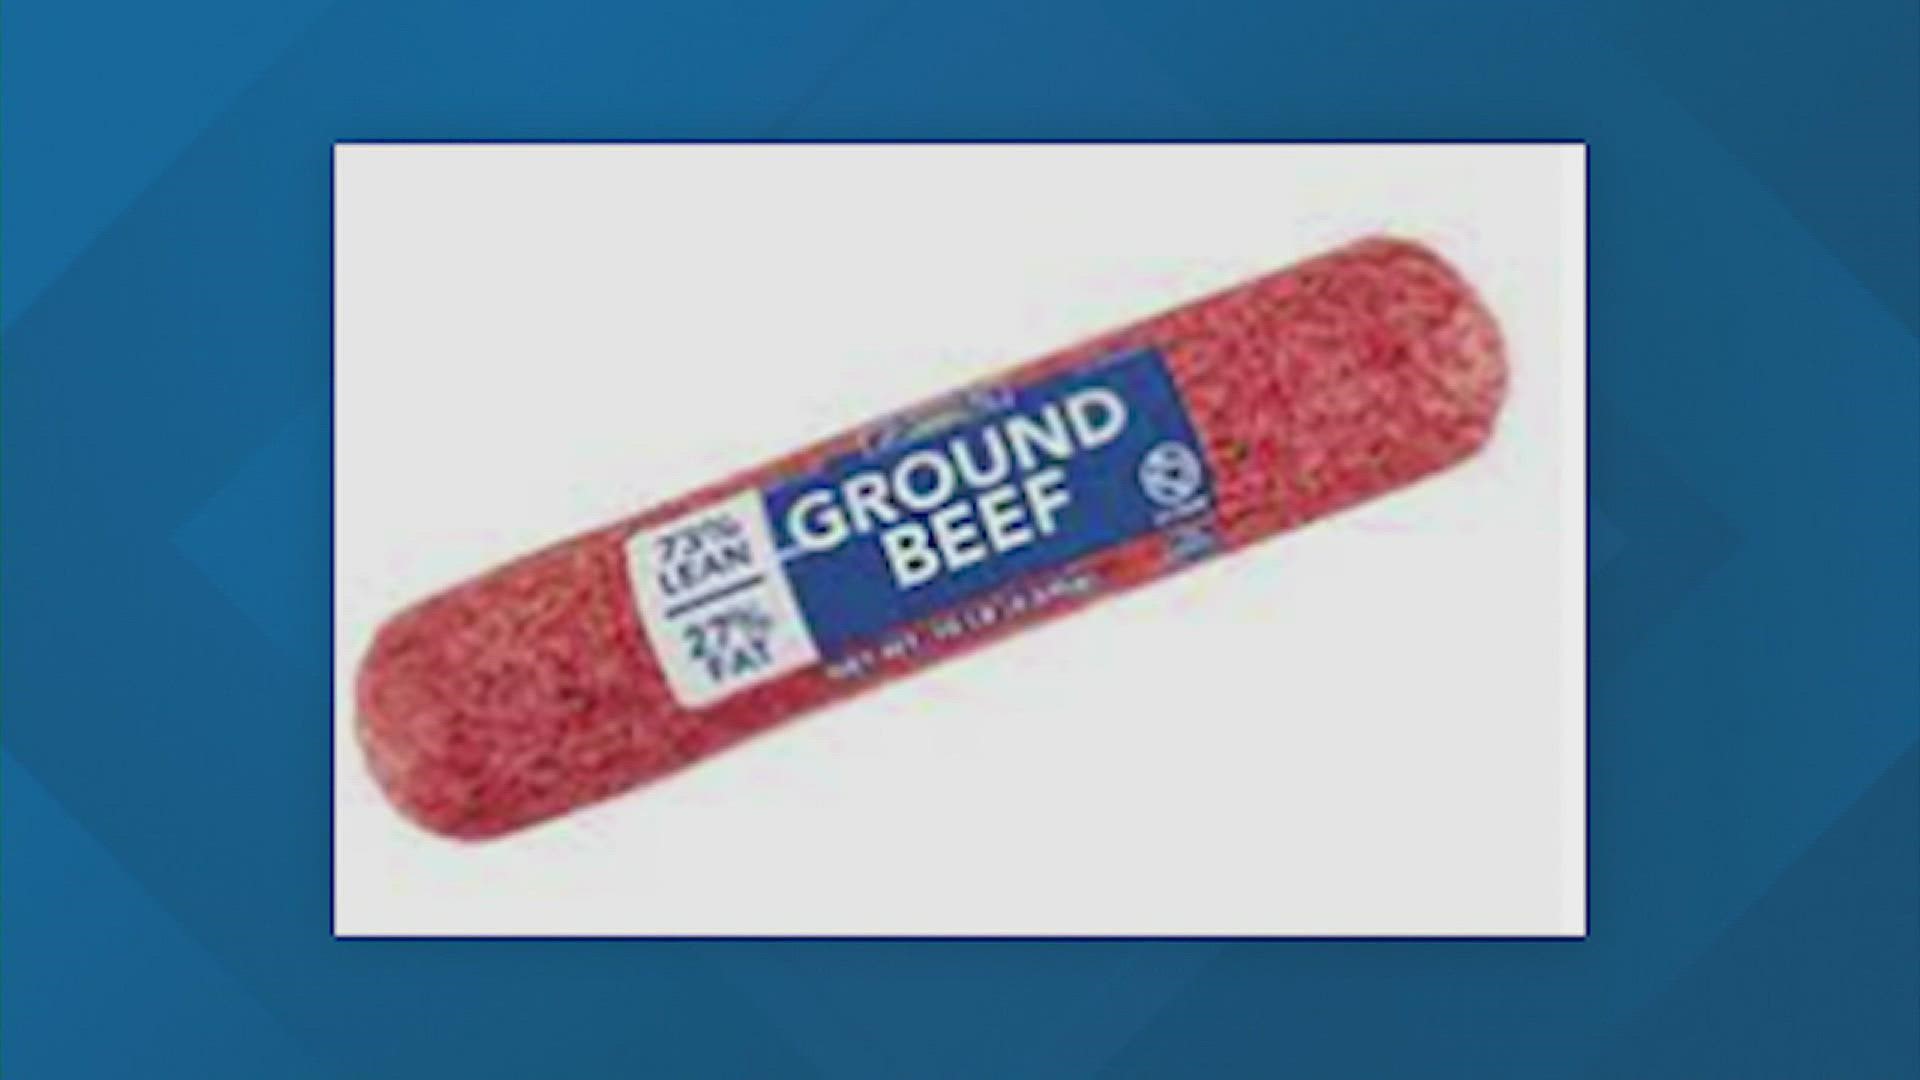 H-E-B said the ground beef involves 5-and 10-pound chubs of the Hill Country Fare 73% lean ground beef, and the 80% lean ground chucks.